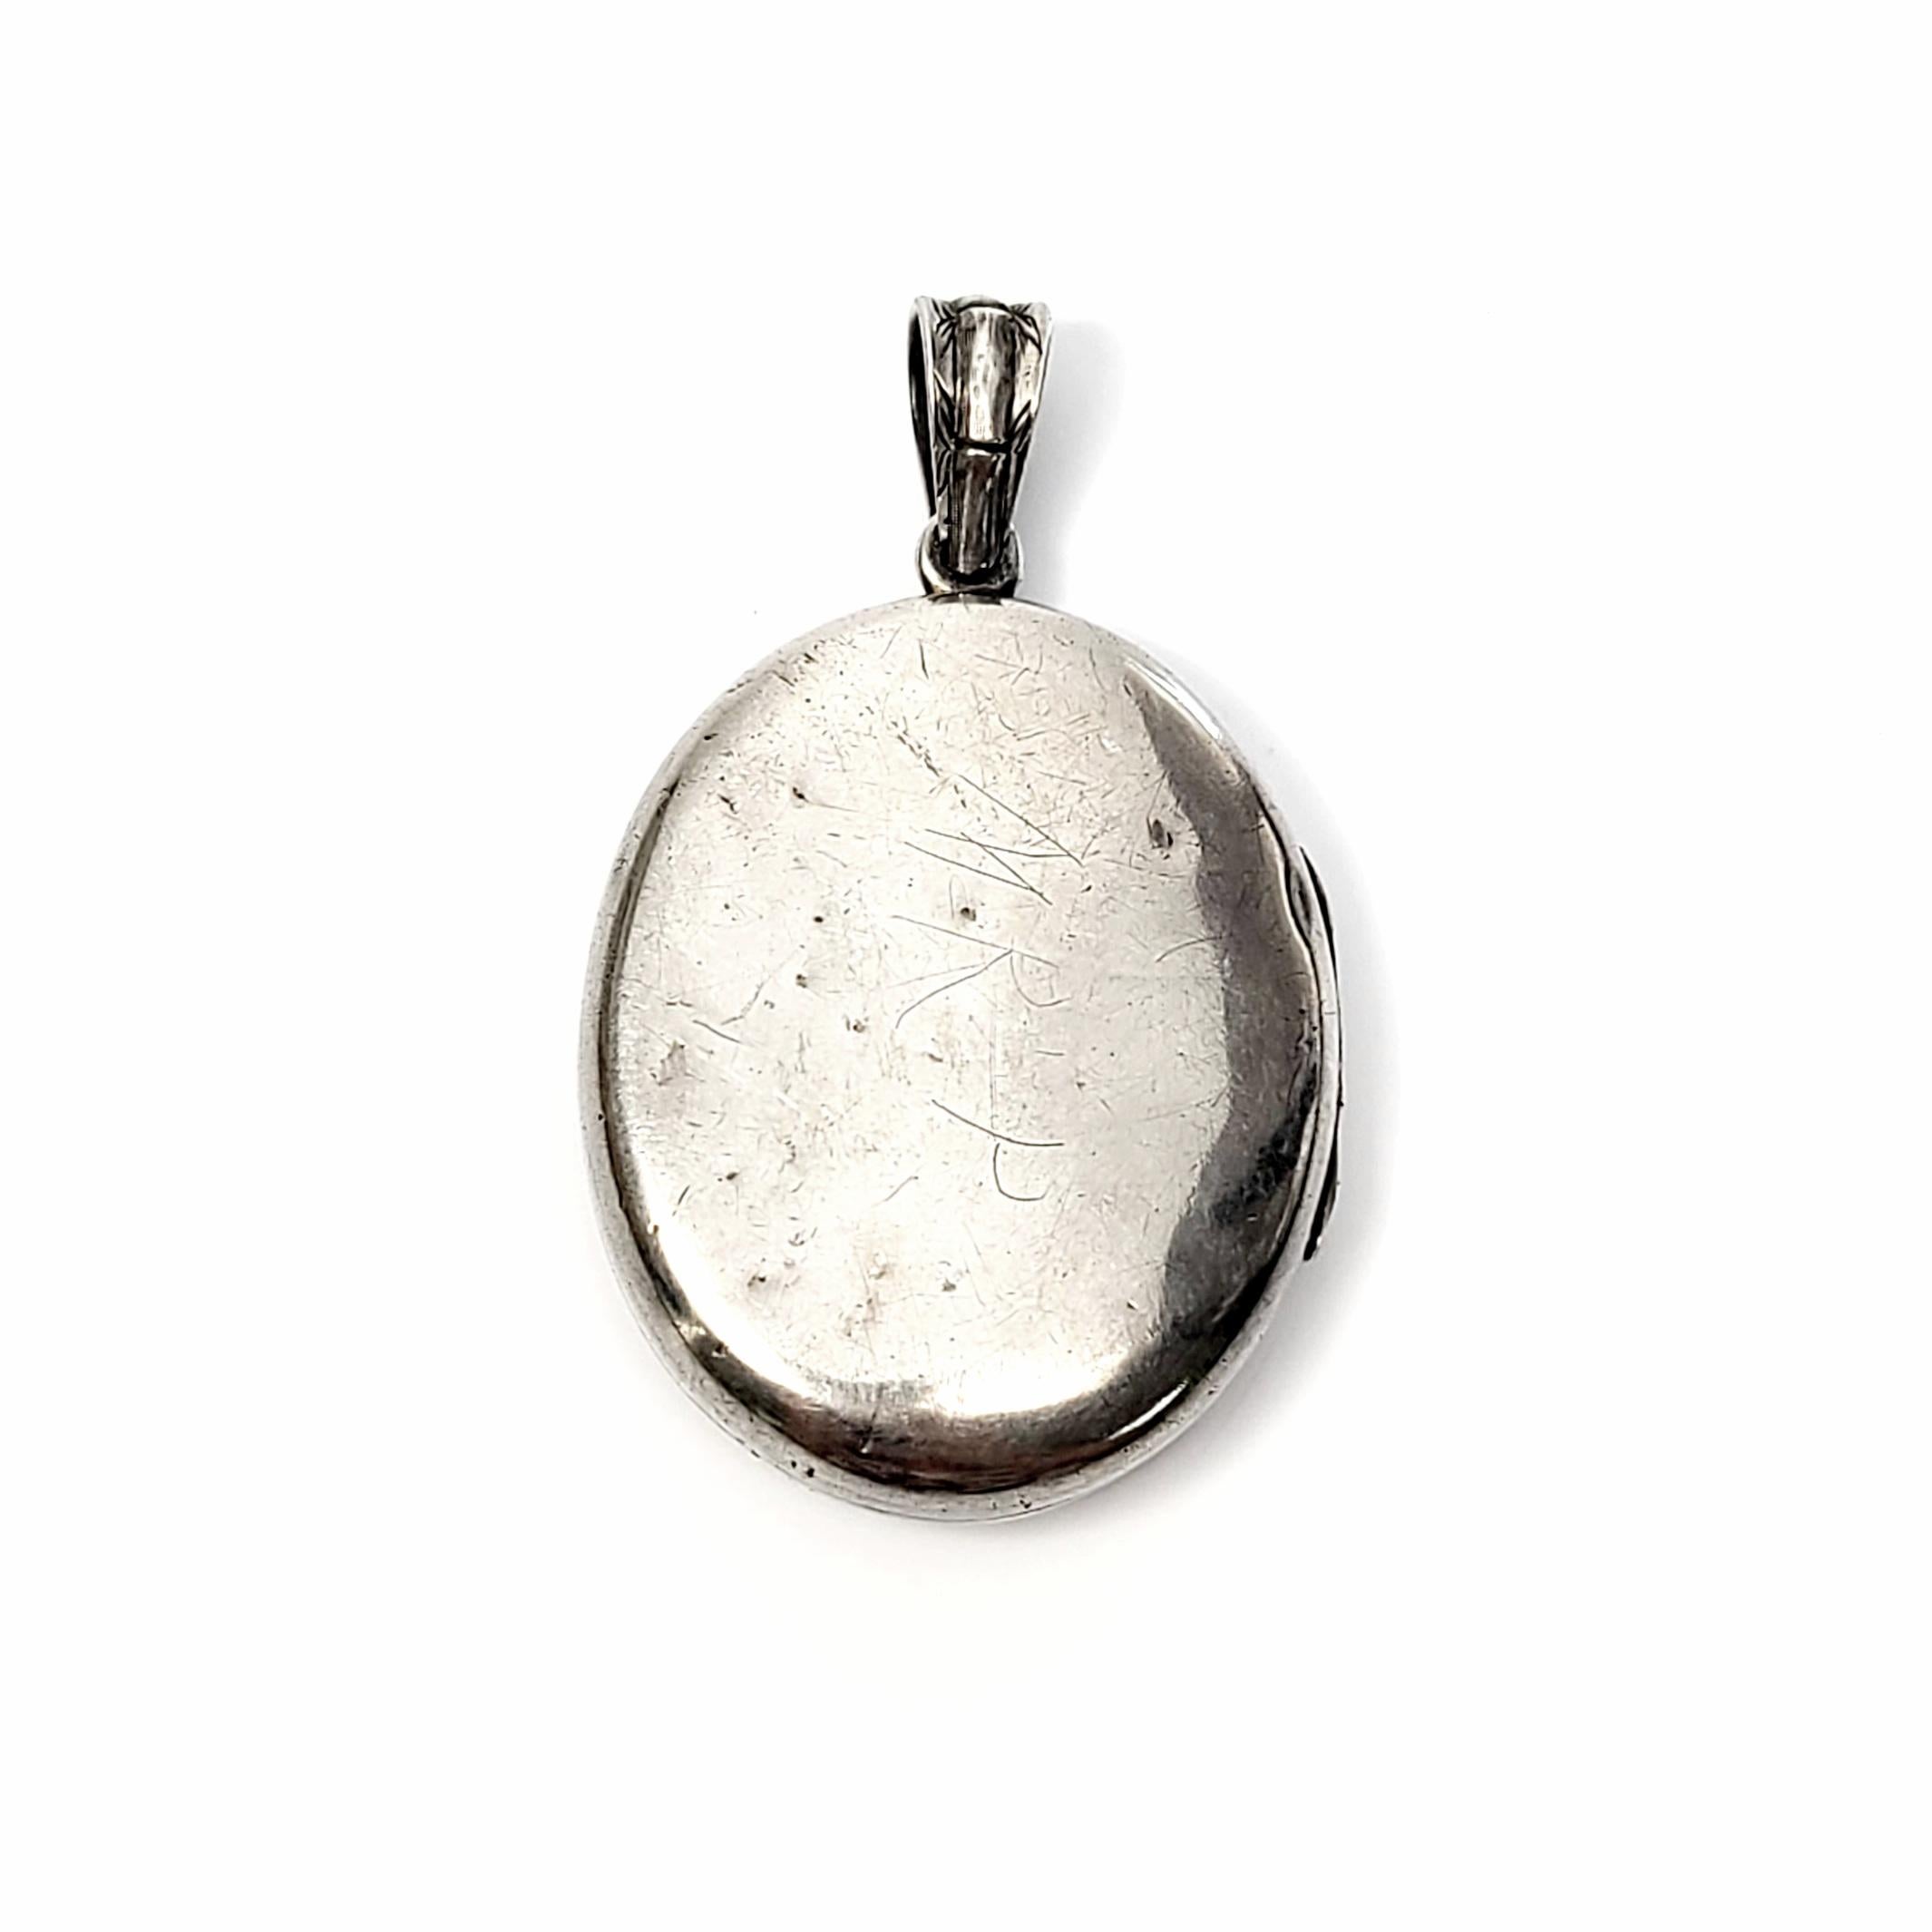 Sterling silver locket of the late 19th century Aesthetic Movement period.

This beautiful antique sterling silver oval locket features an etched design with a gold overlay bird, and a polished smooth back.

Measures approx 2